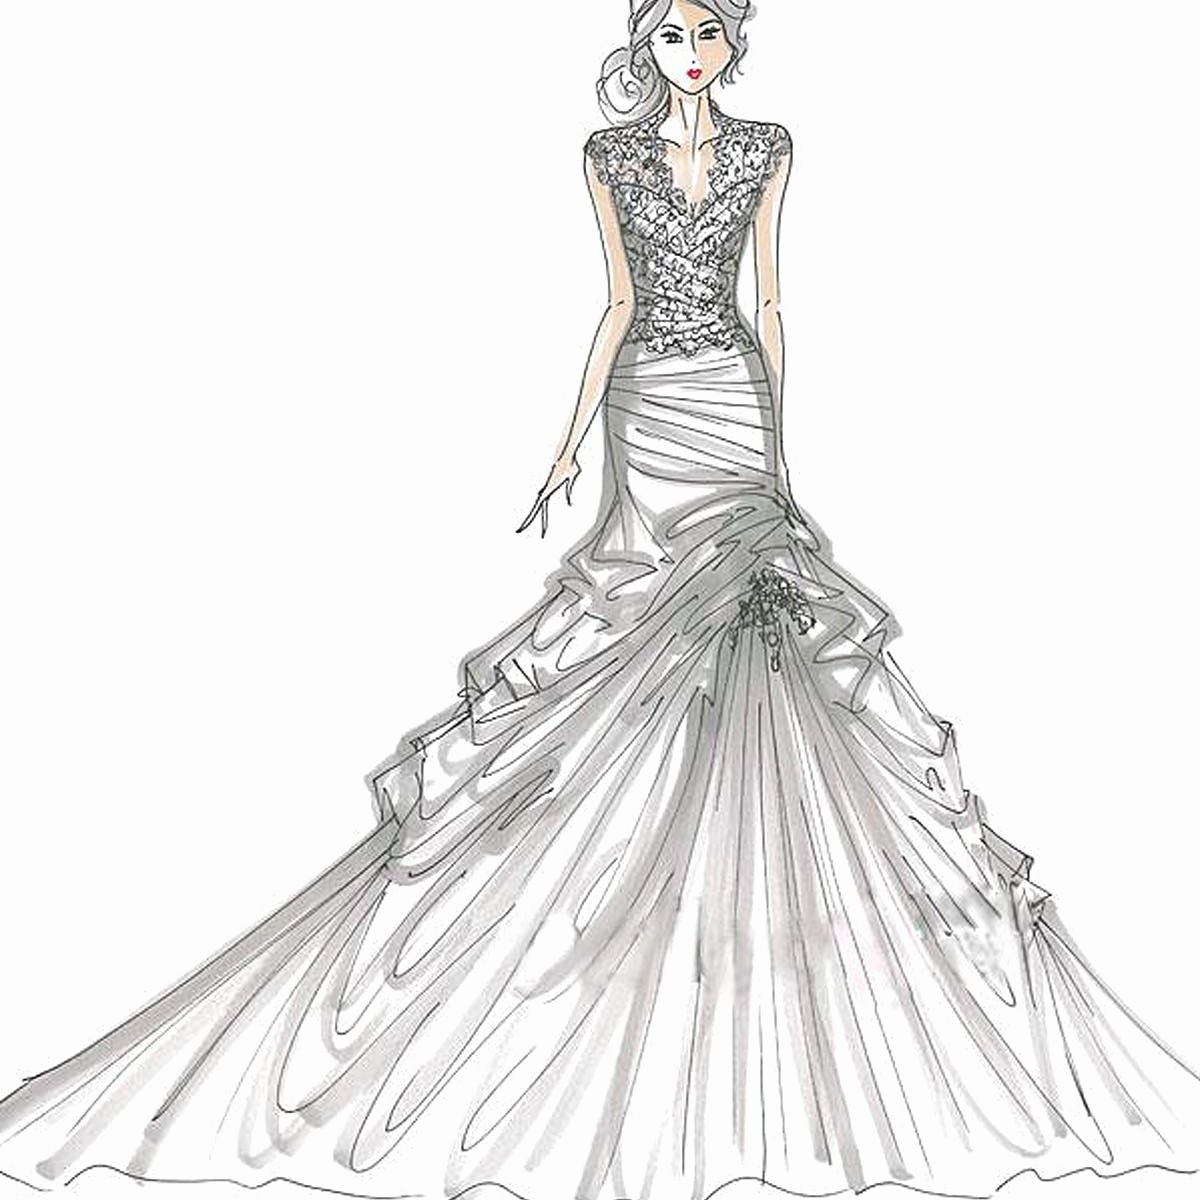 Dress Sketches For Fashion Designing at PaintingValley.com | Explore ...